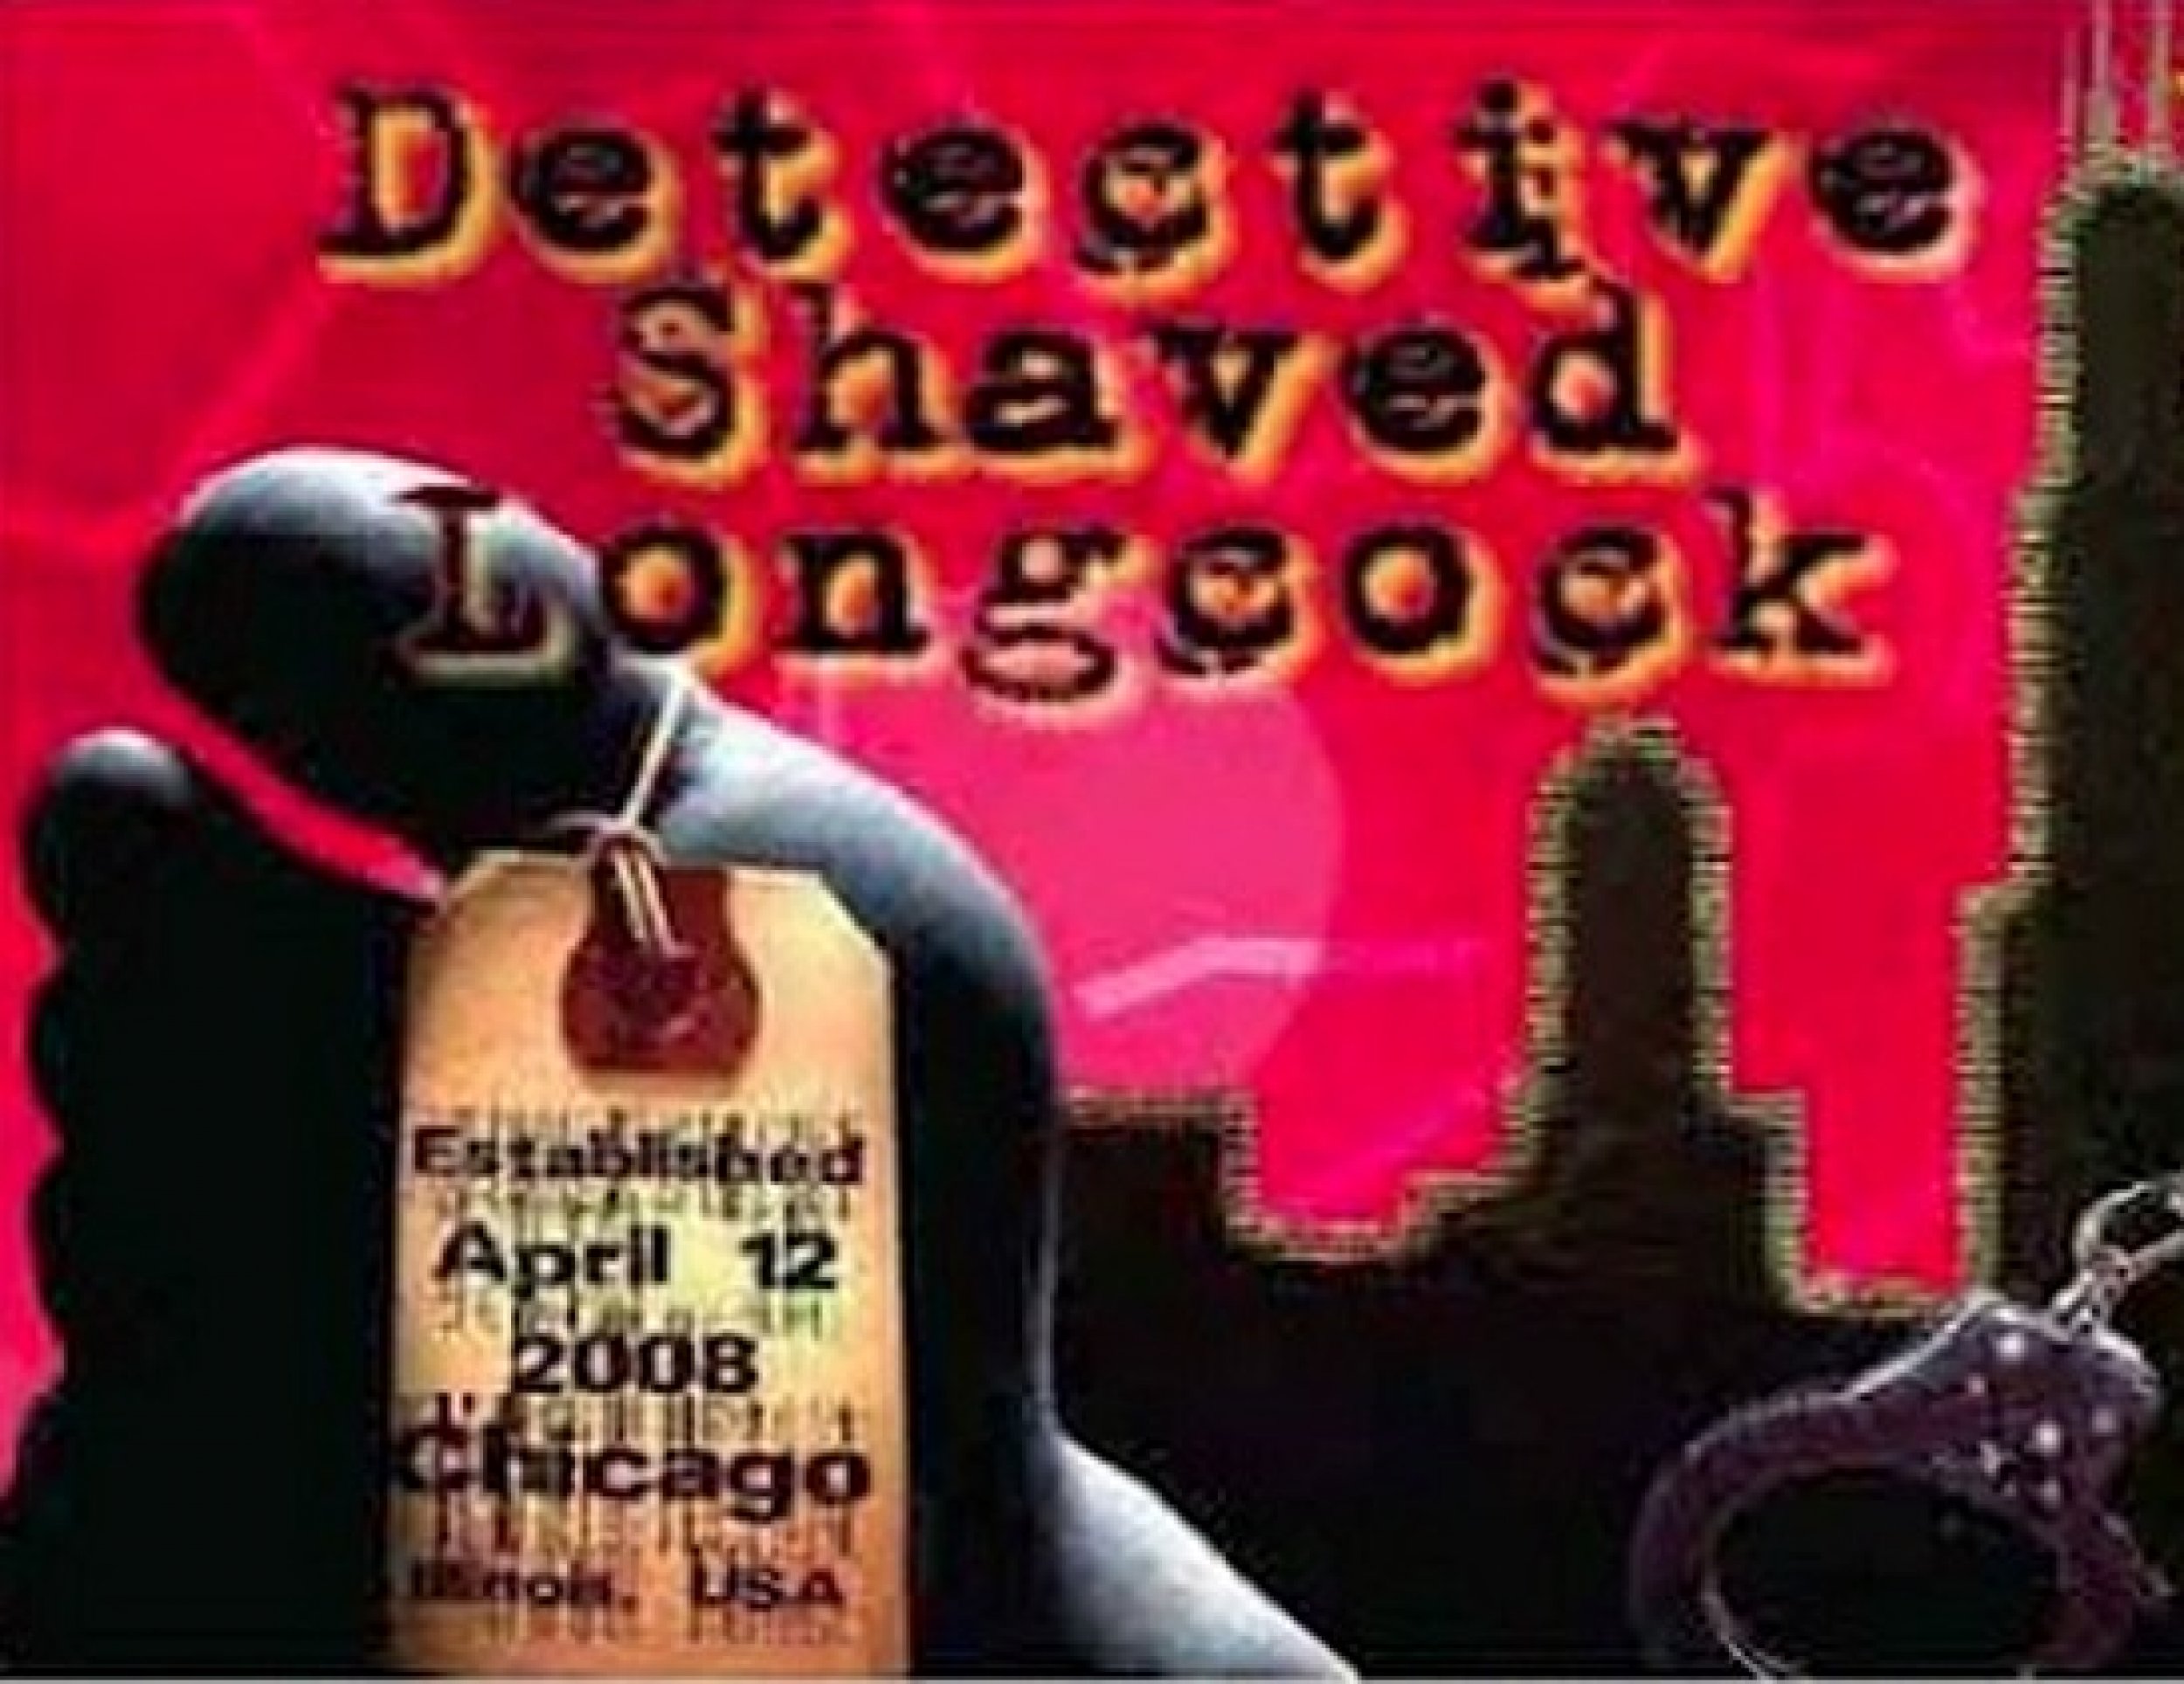 Detective Shaved Longcock Celebrates Four Years A Rare Interview With